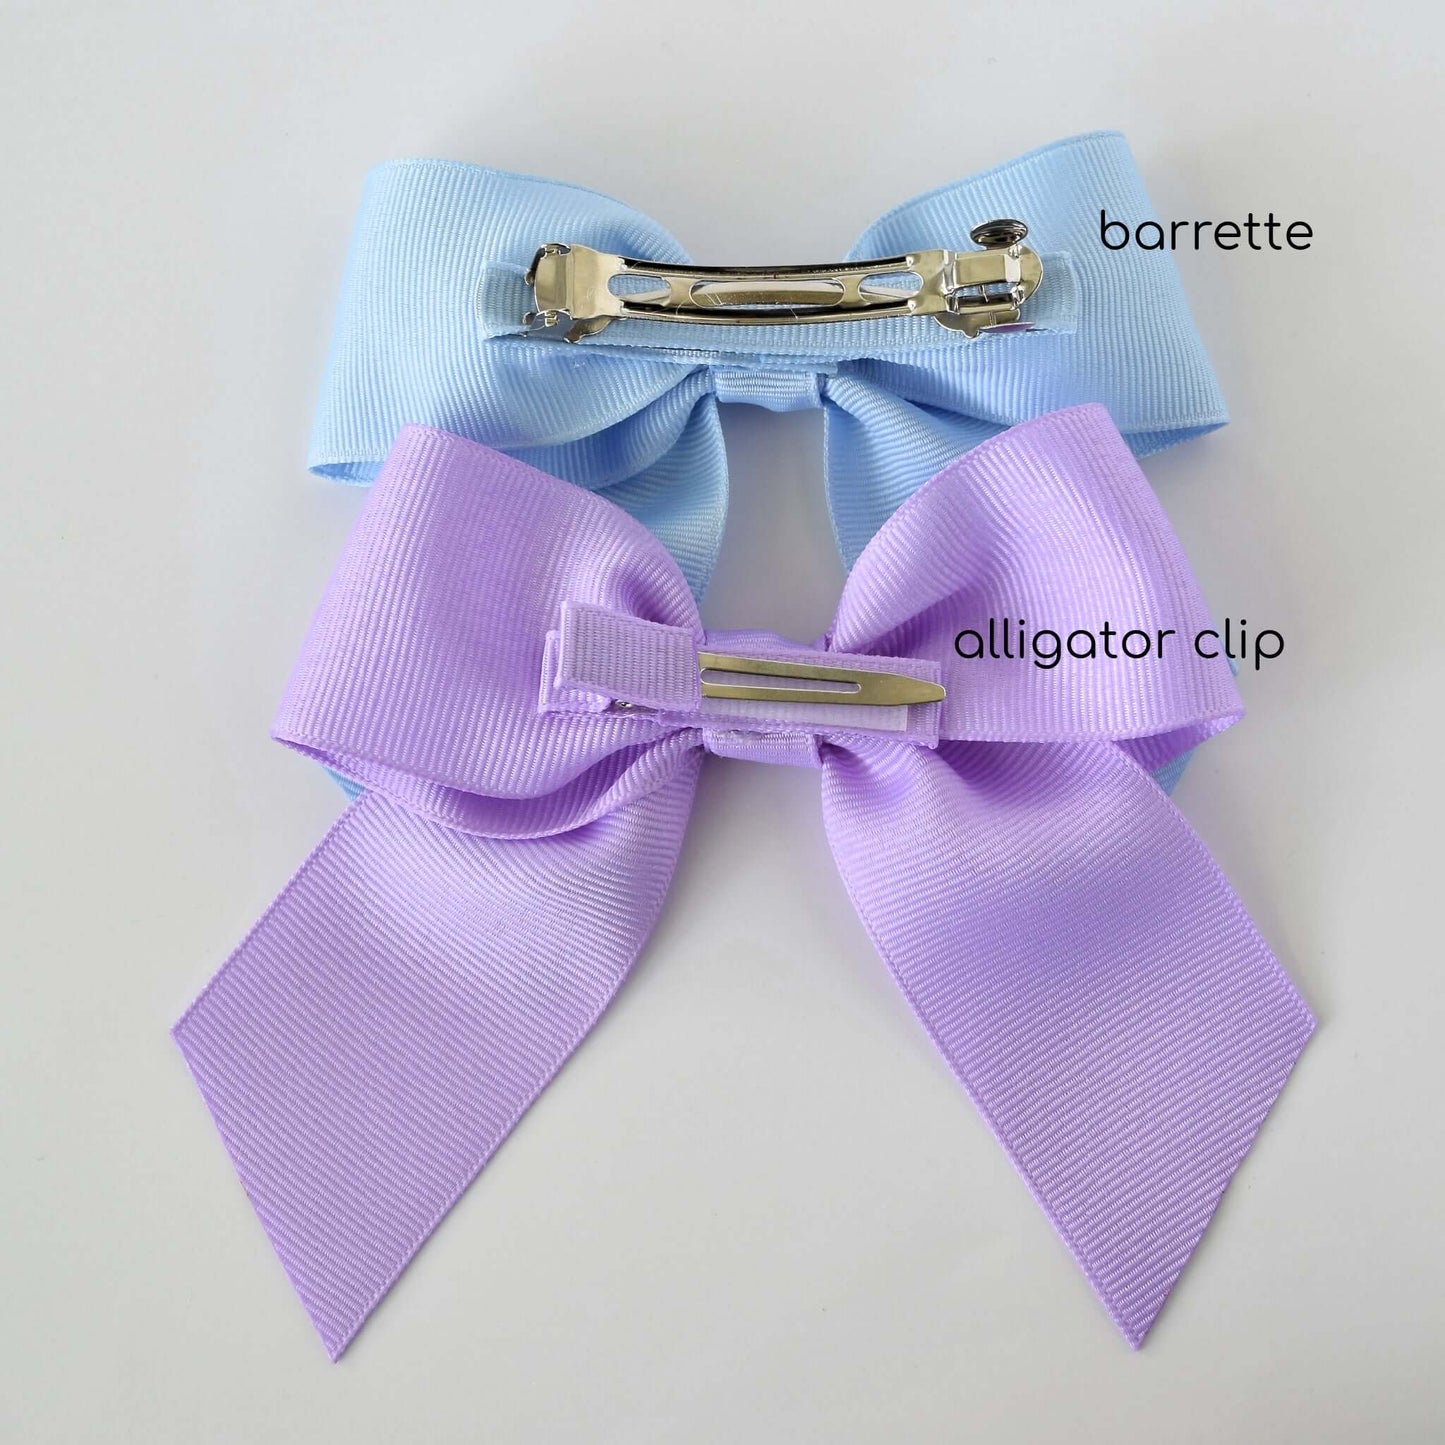 Light blue grosgrain sailor bow with French barrette and lavender grosgrain sailor bow with alligator clip, highlighting no-slip grip features.